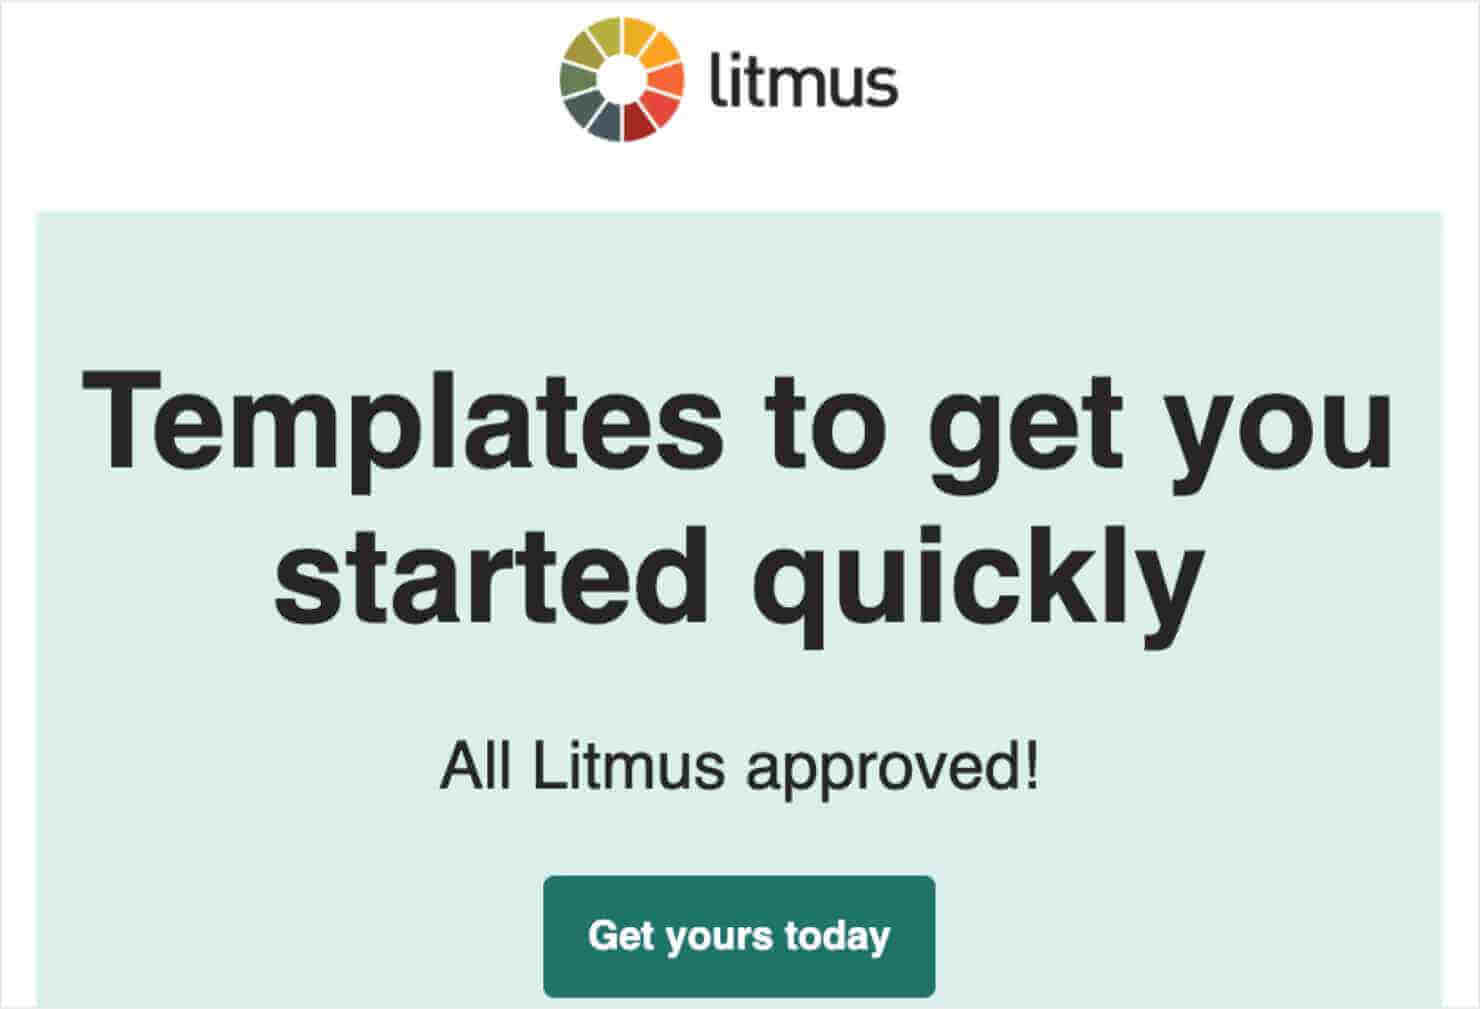 The Litmus logo is at the top of the email. Heading says "Templates to get you started quickly." Subheading says "All Litmus approved!" Large green CTA button says "Get your today"